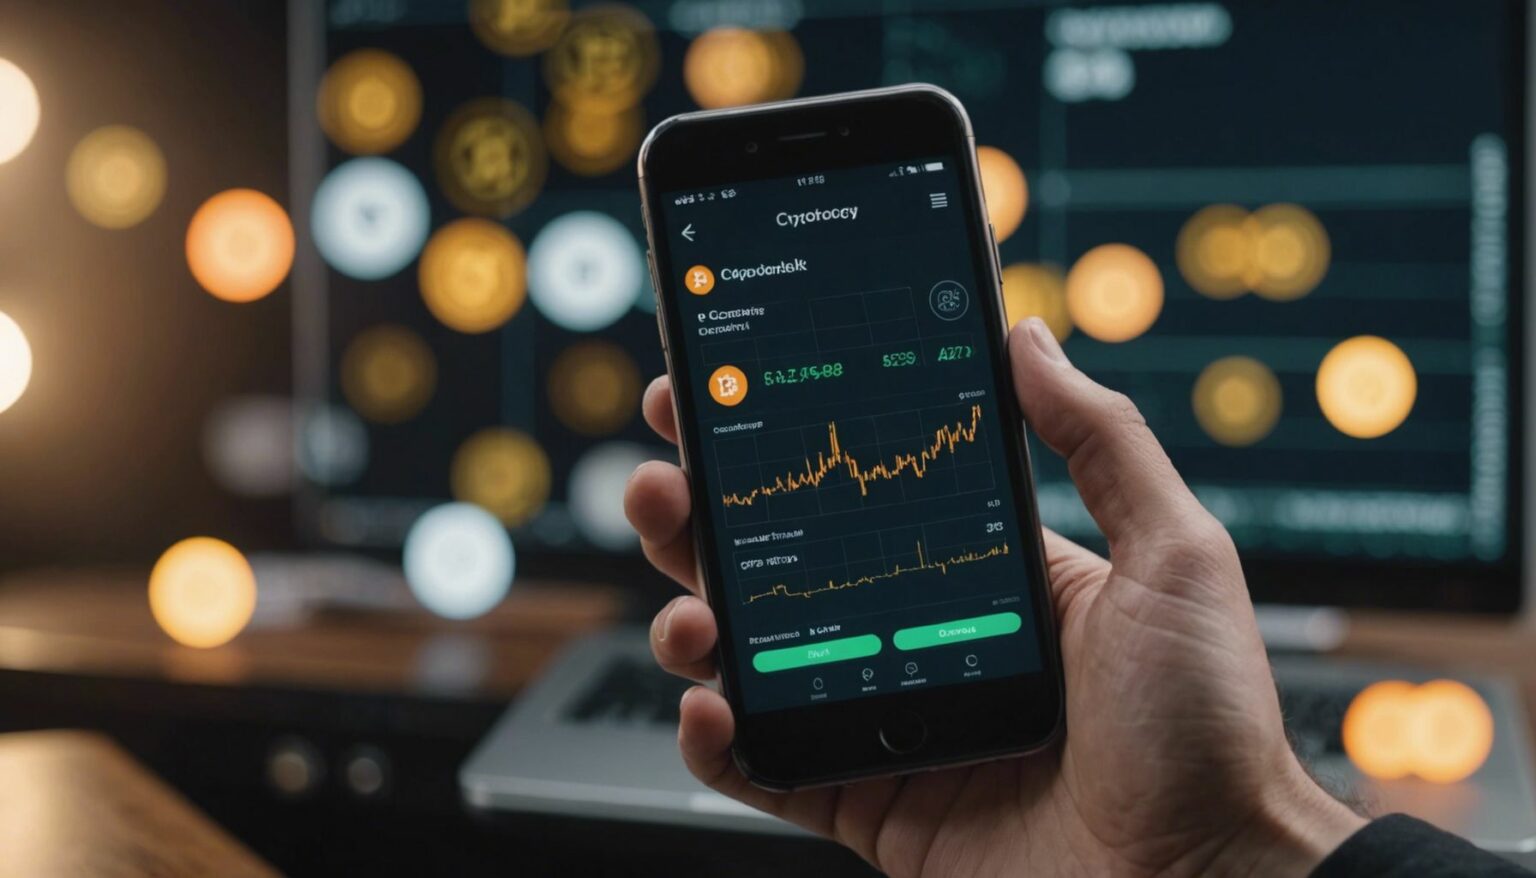 Person holding smartphone with crypto app, surrounded by cryptocurrency coins and charts.